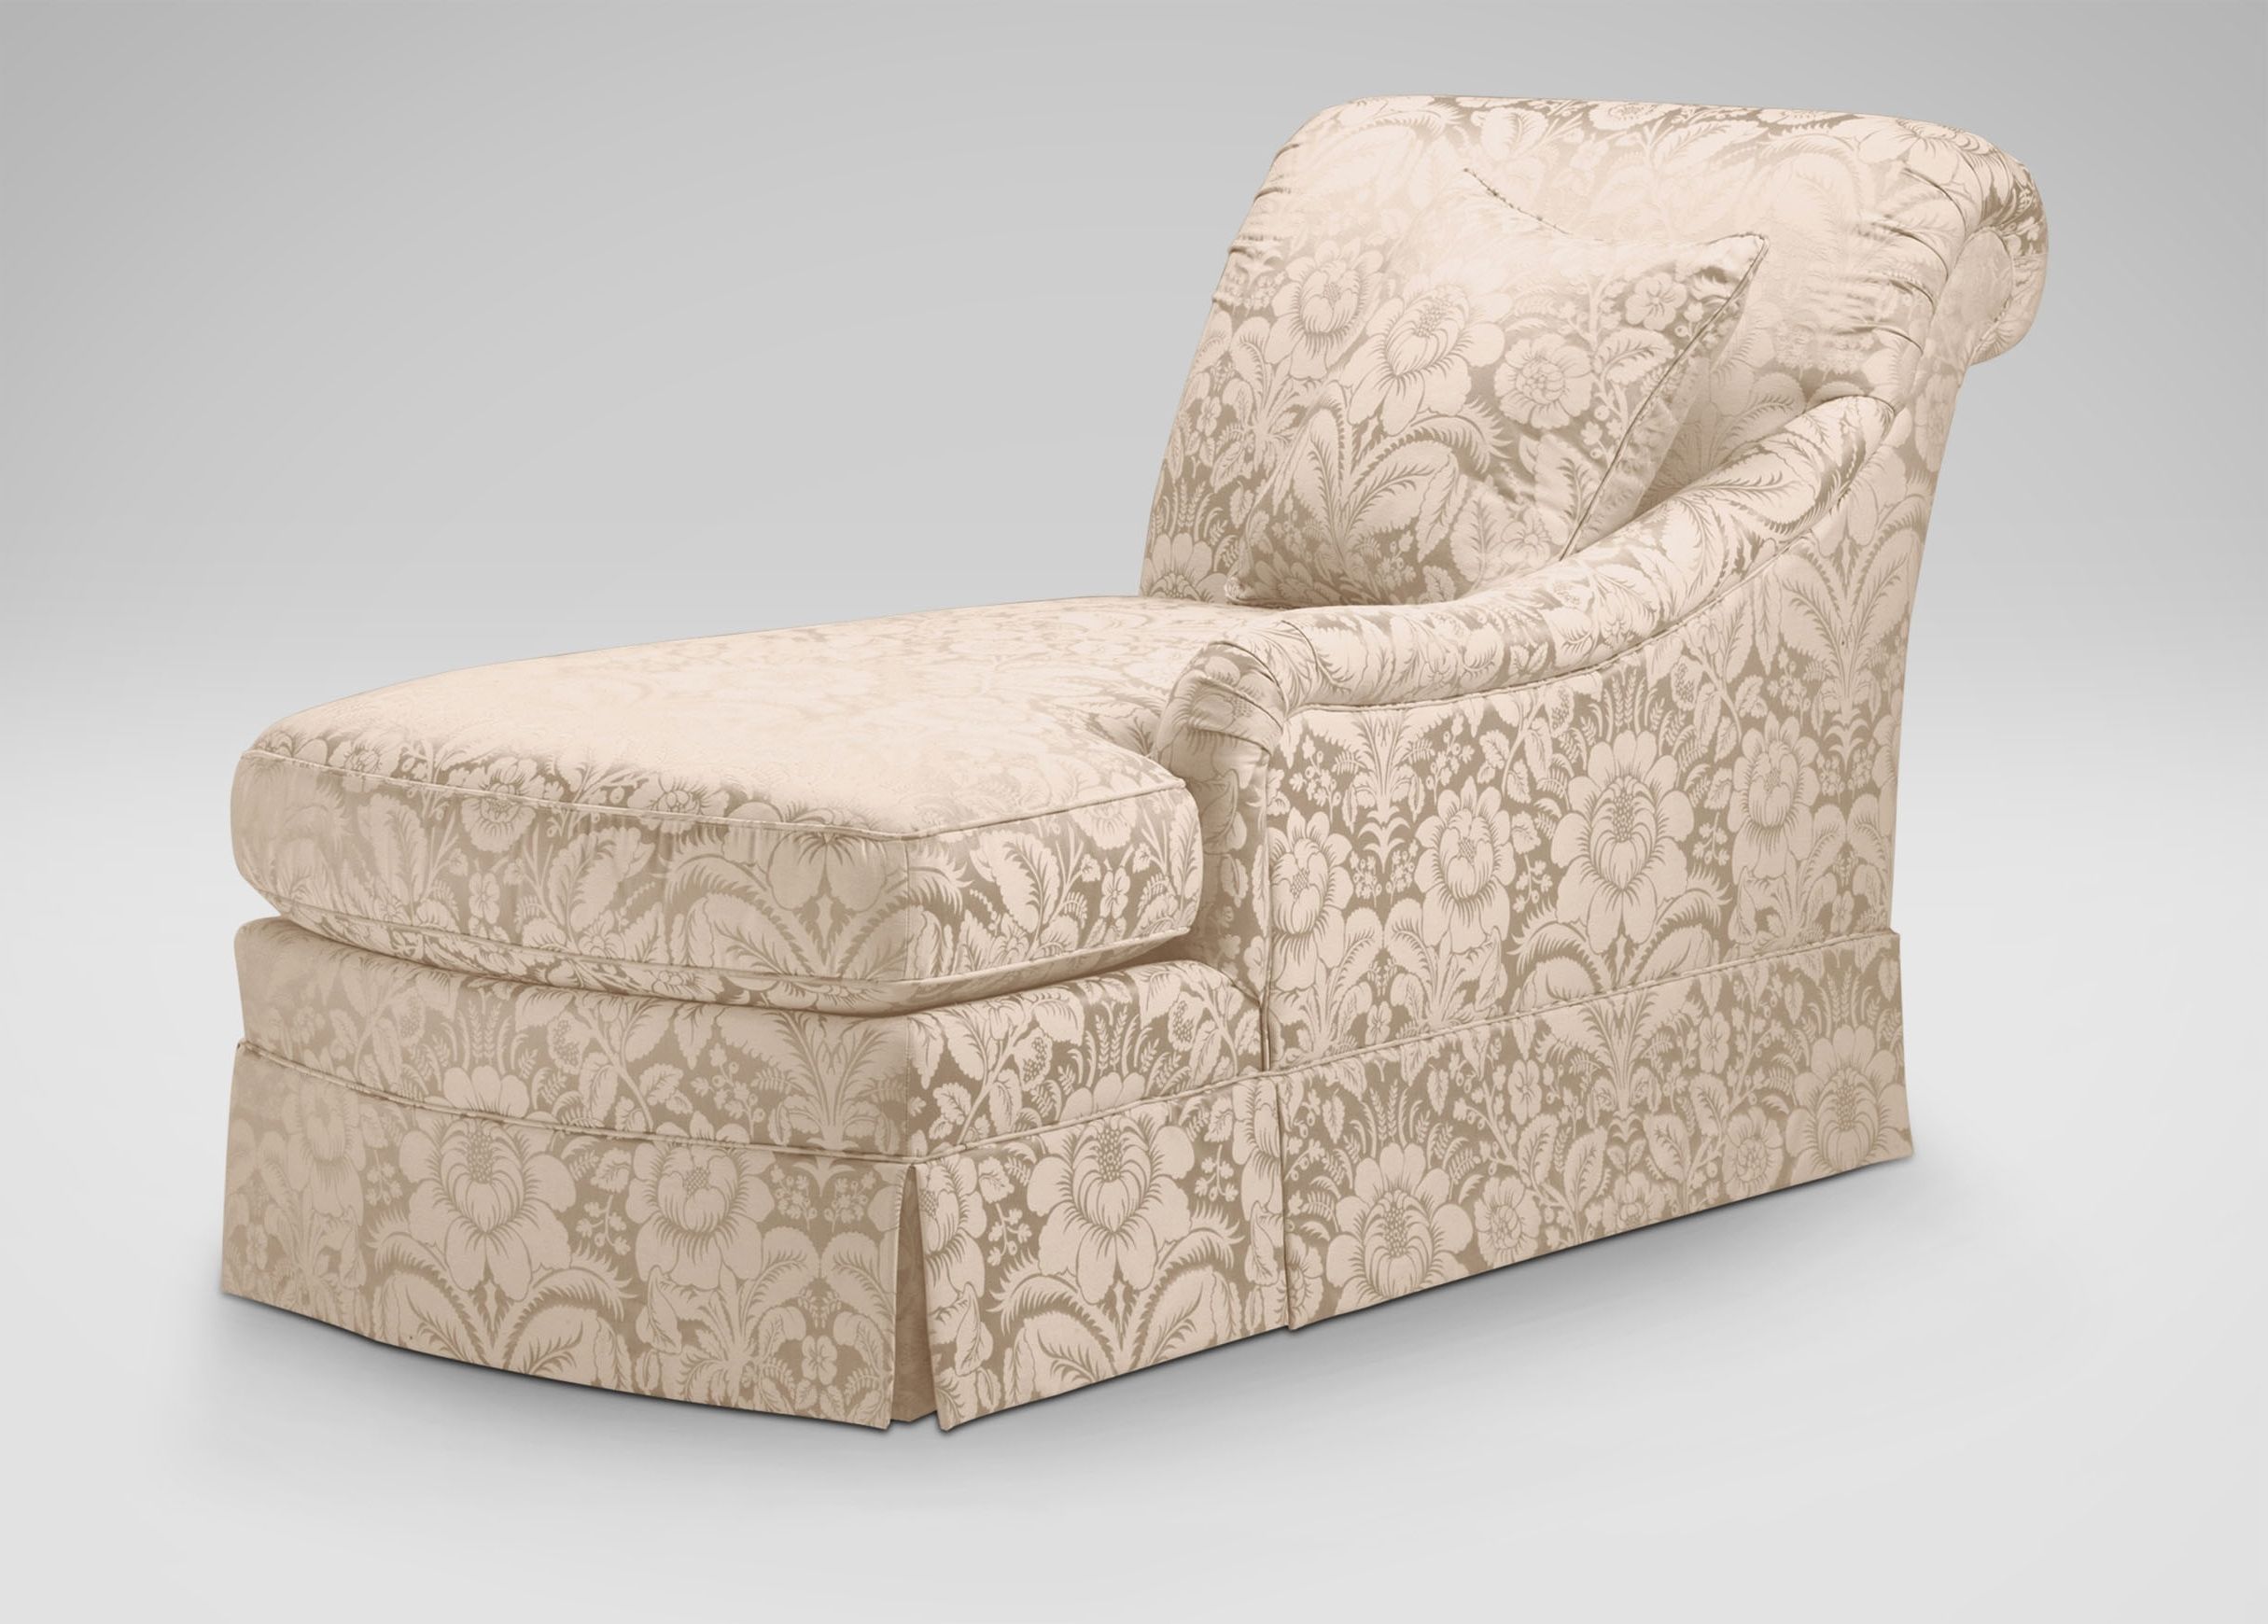 Best And Newest Indoor Chaise Lounge Slipcovers Regarding Chaise Lounge Slipcovers – Slipcovers For Chaise Lounge Chairs (View 3 of 15)